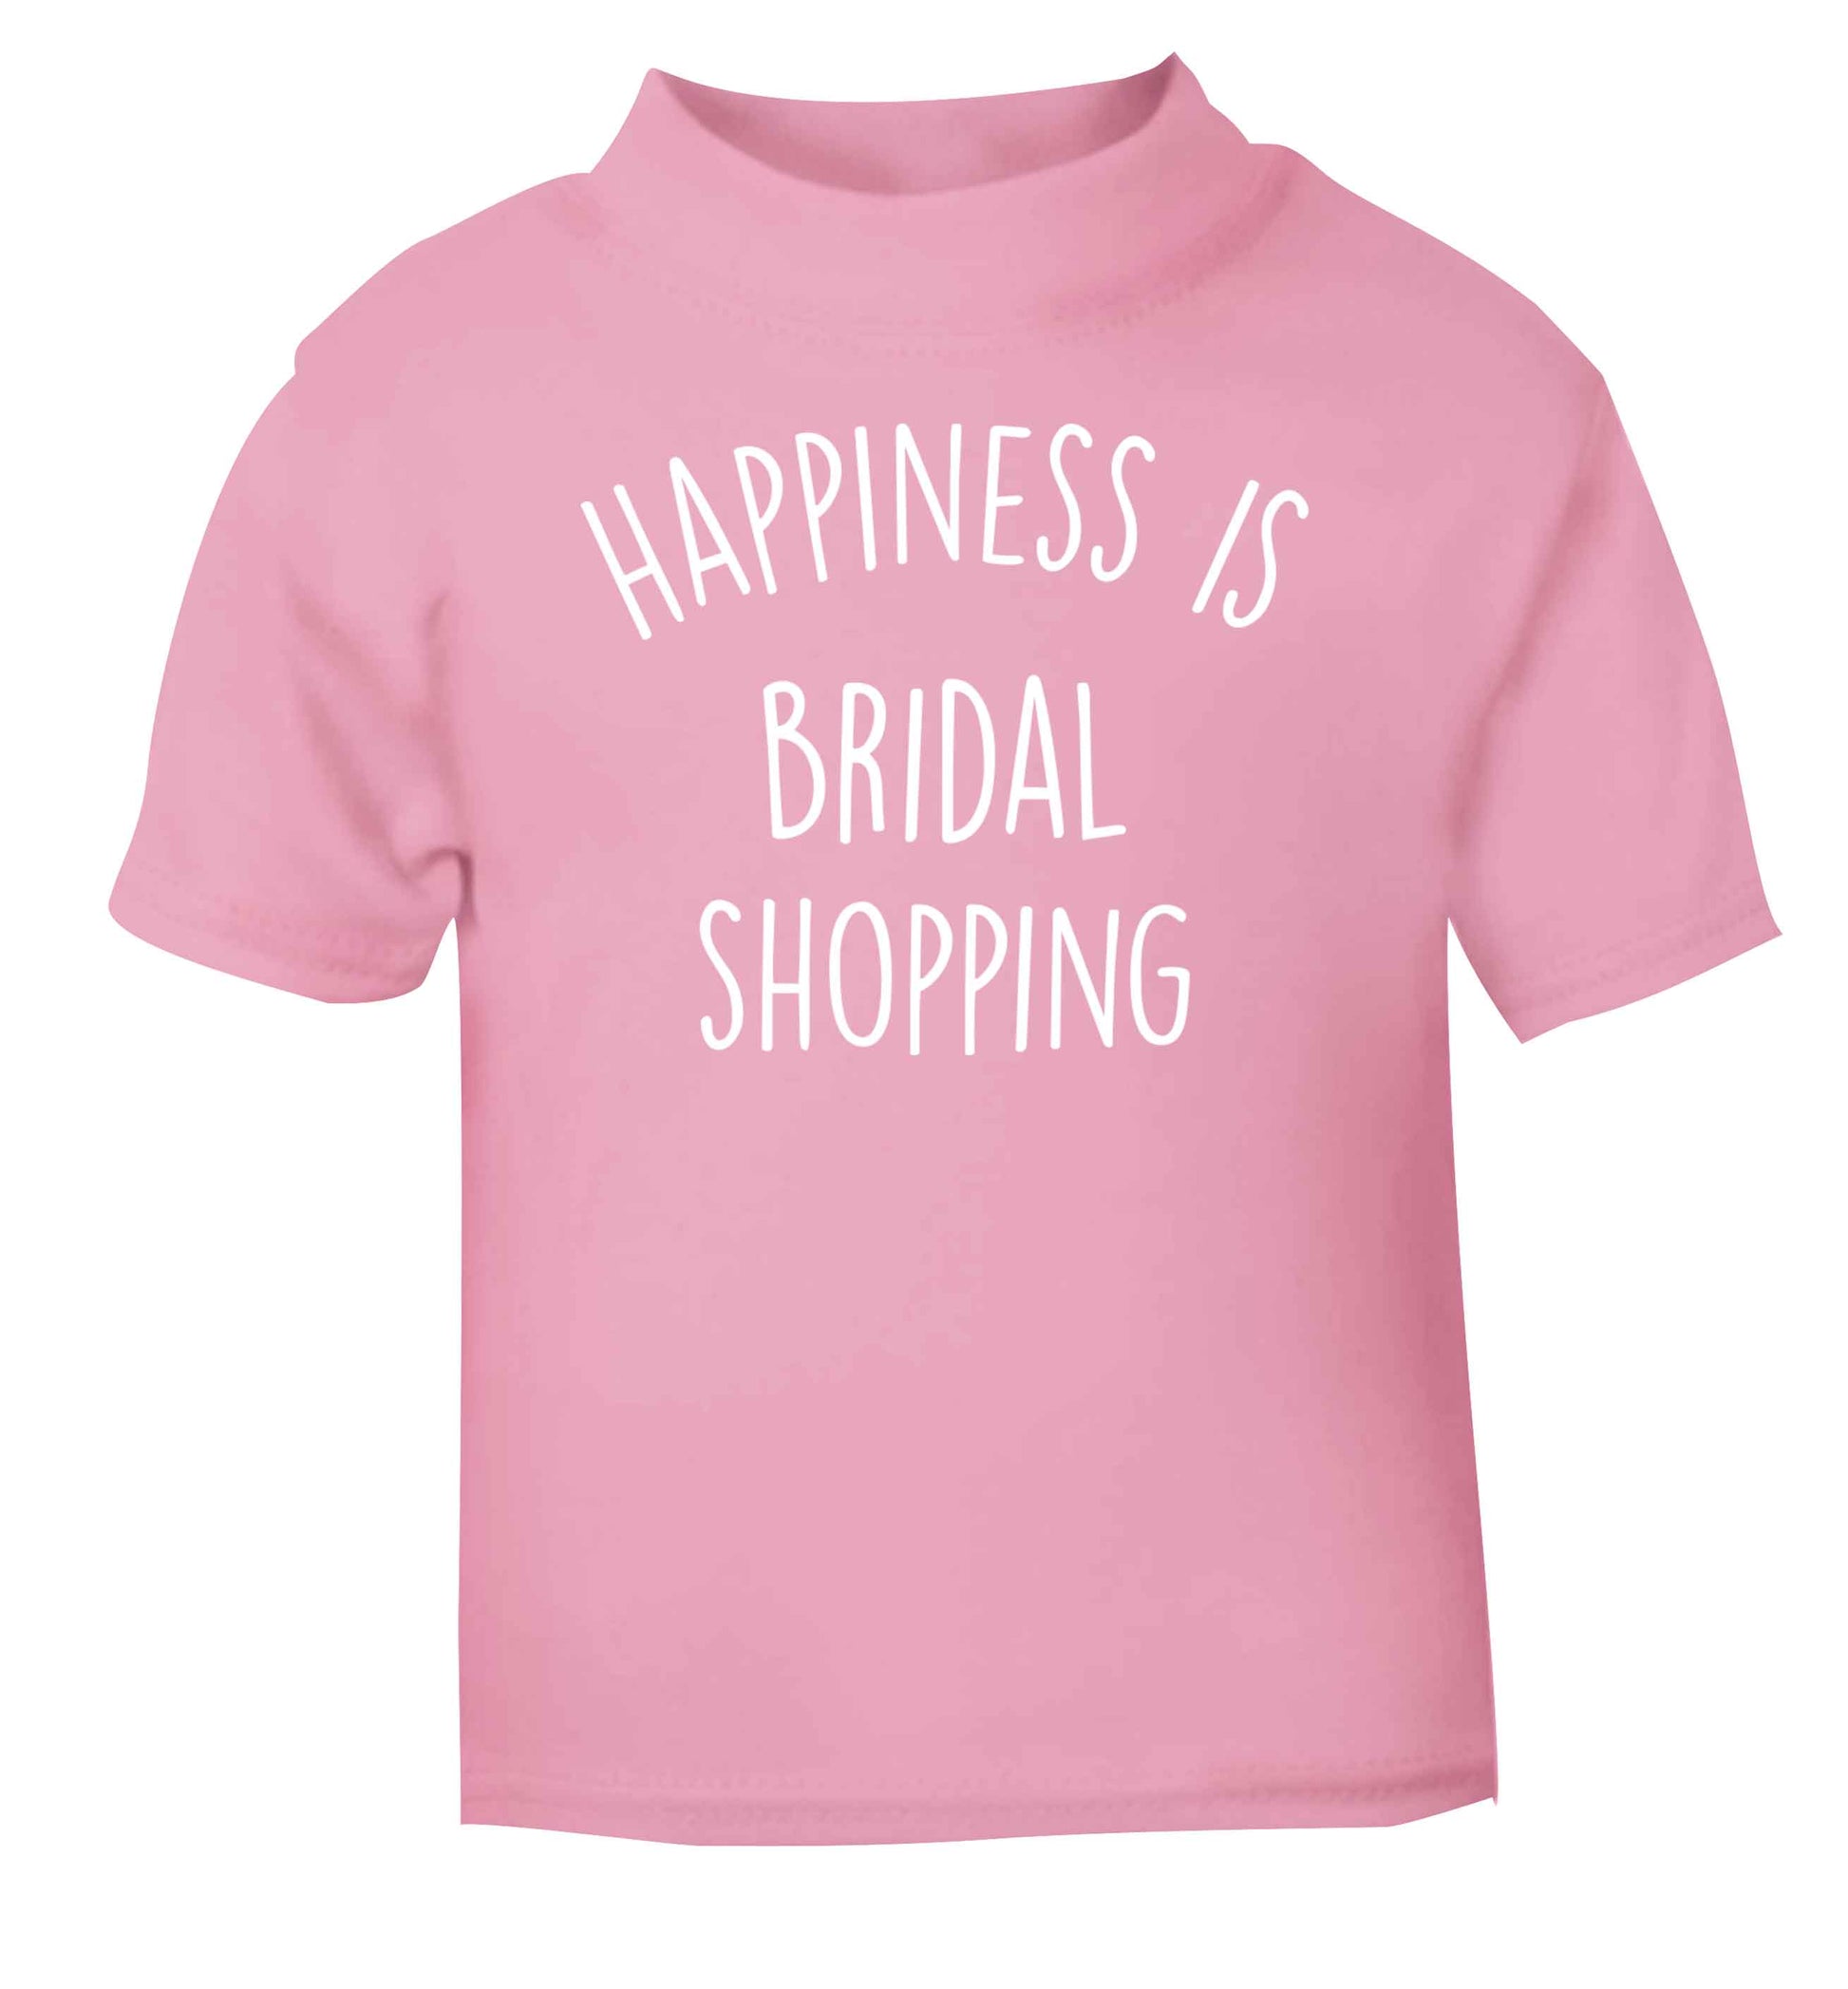 Happiness is bridal shopping light pink baby toddler Tshirt 2 Years